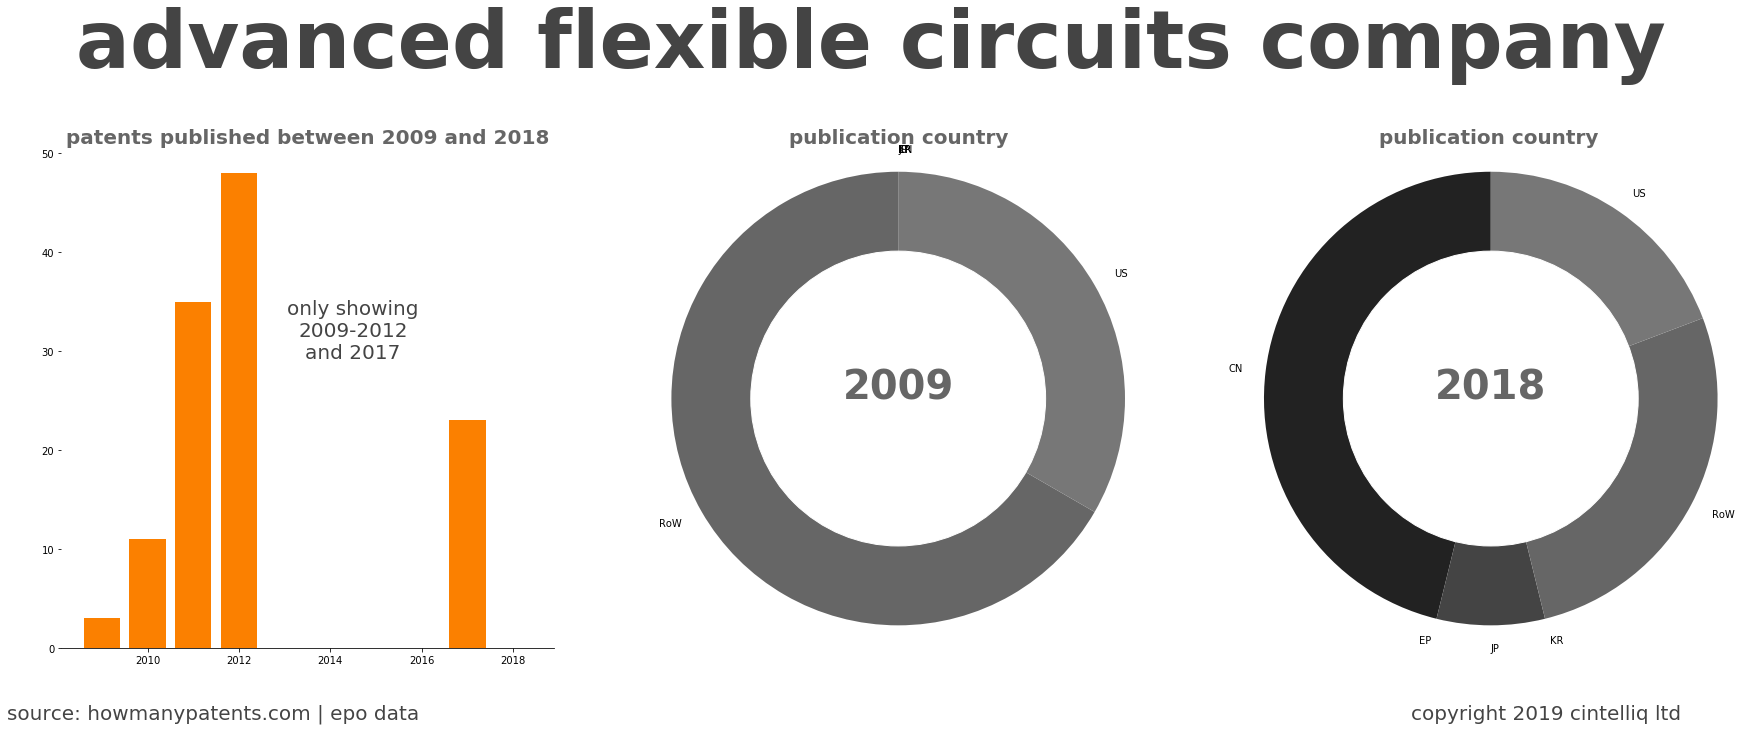 summary of patents for Advanced Flexible Circuits Company